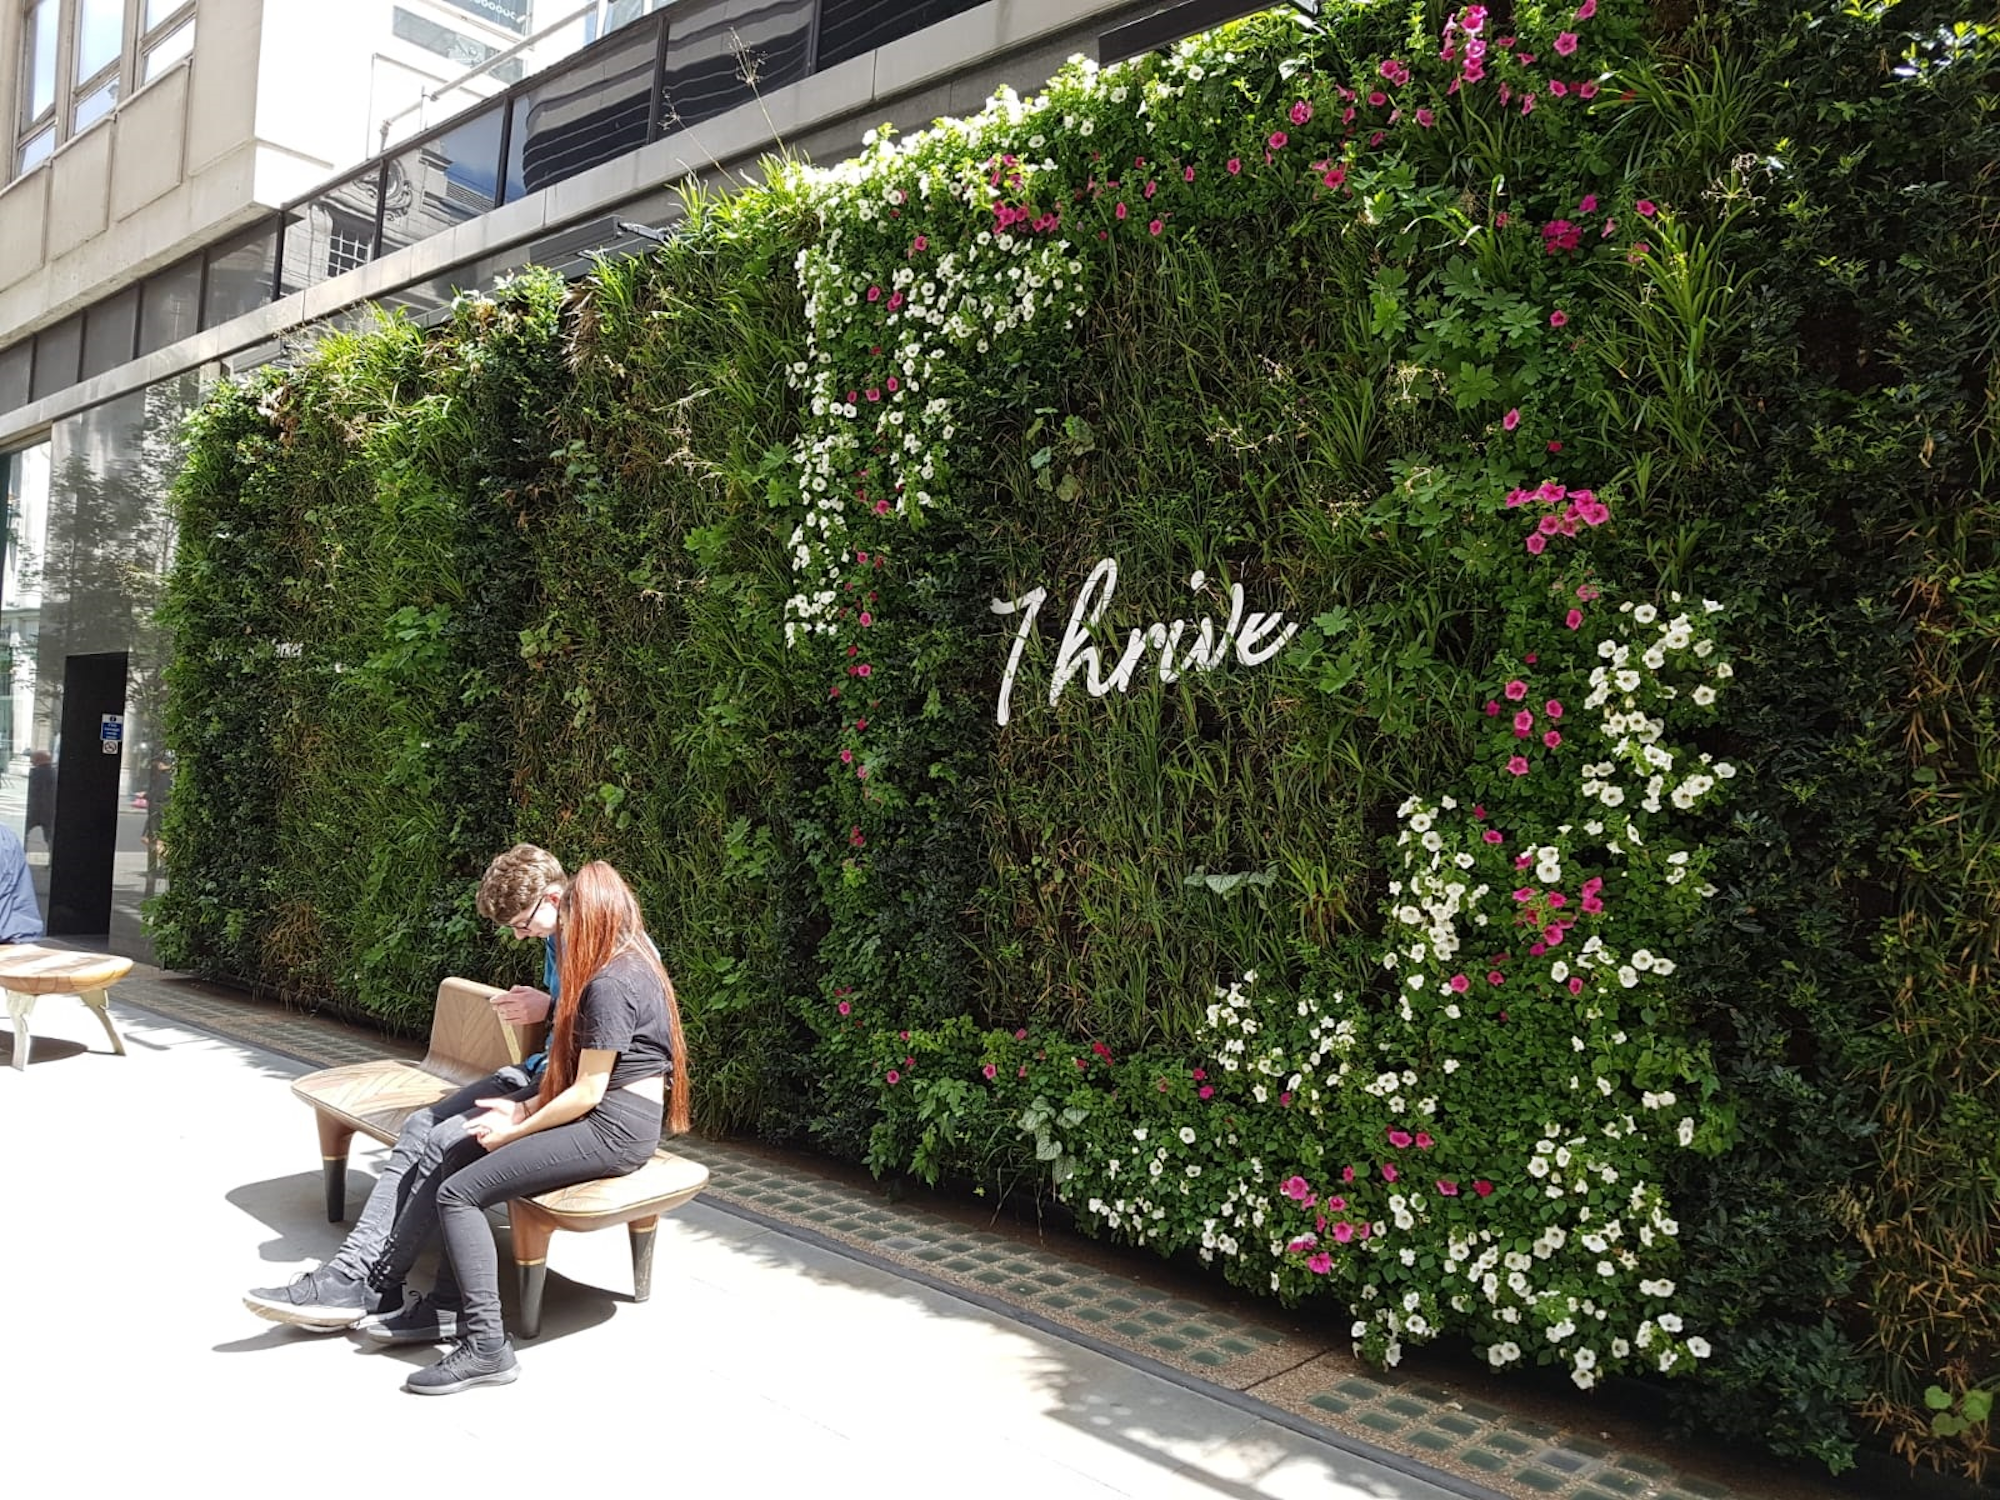 Spring At St James's Market Living Wall With Thrive Signage And Spring Flowers